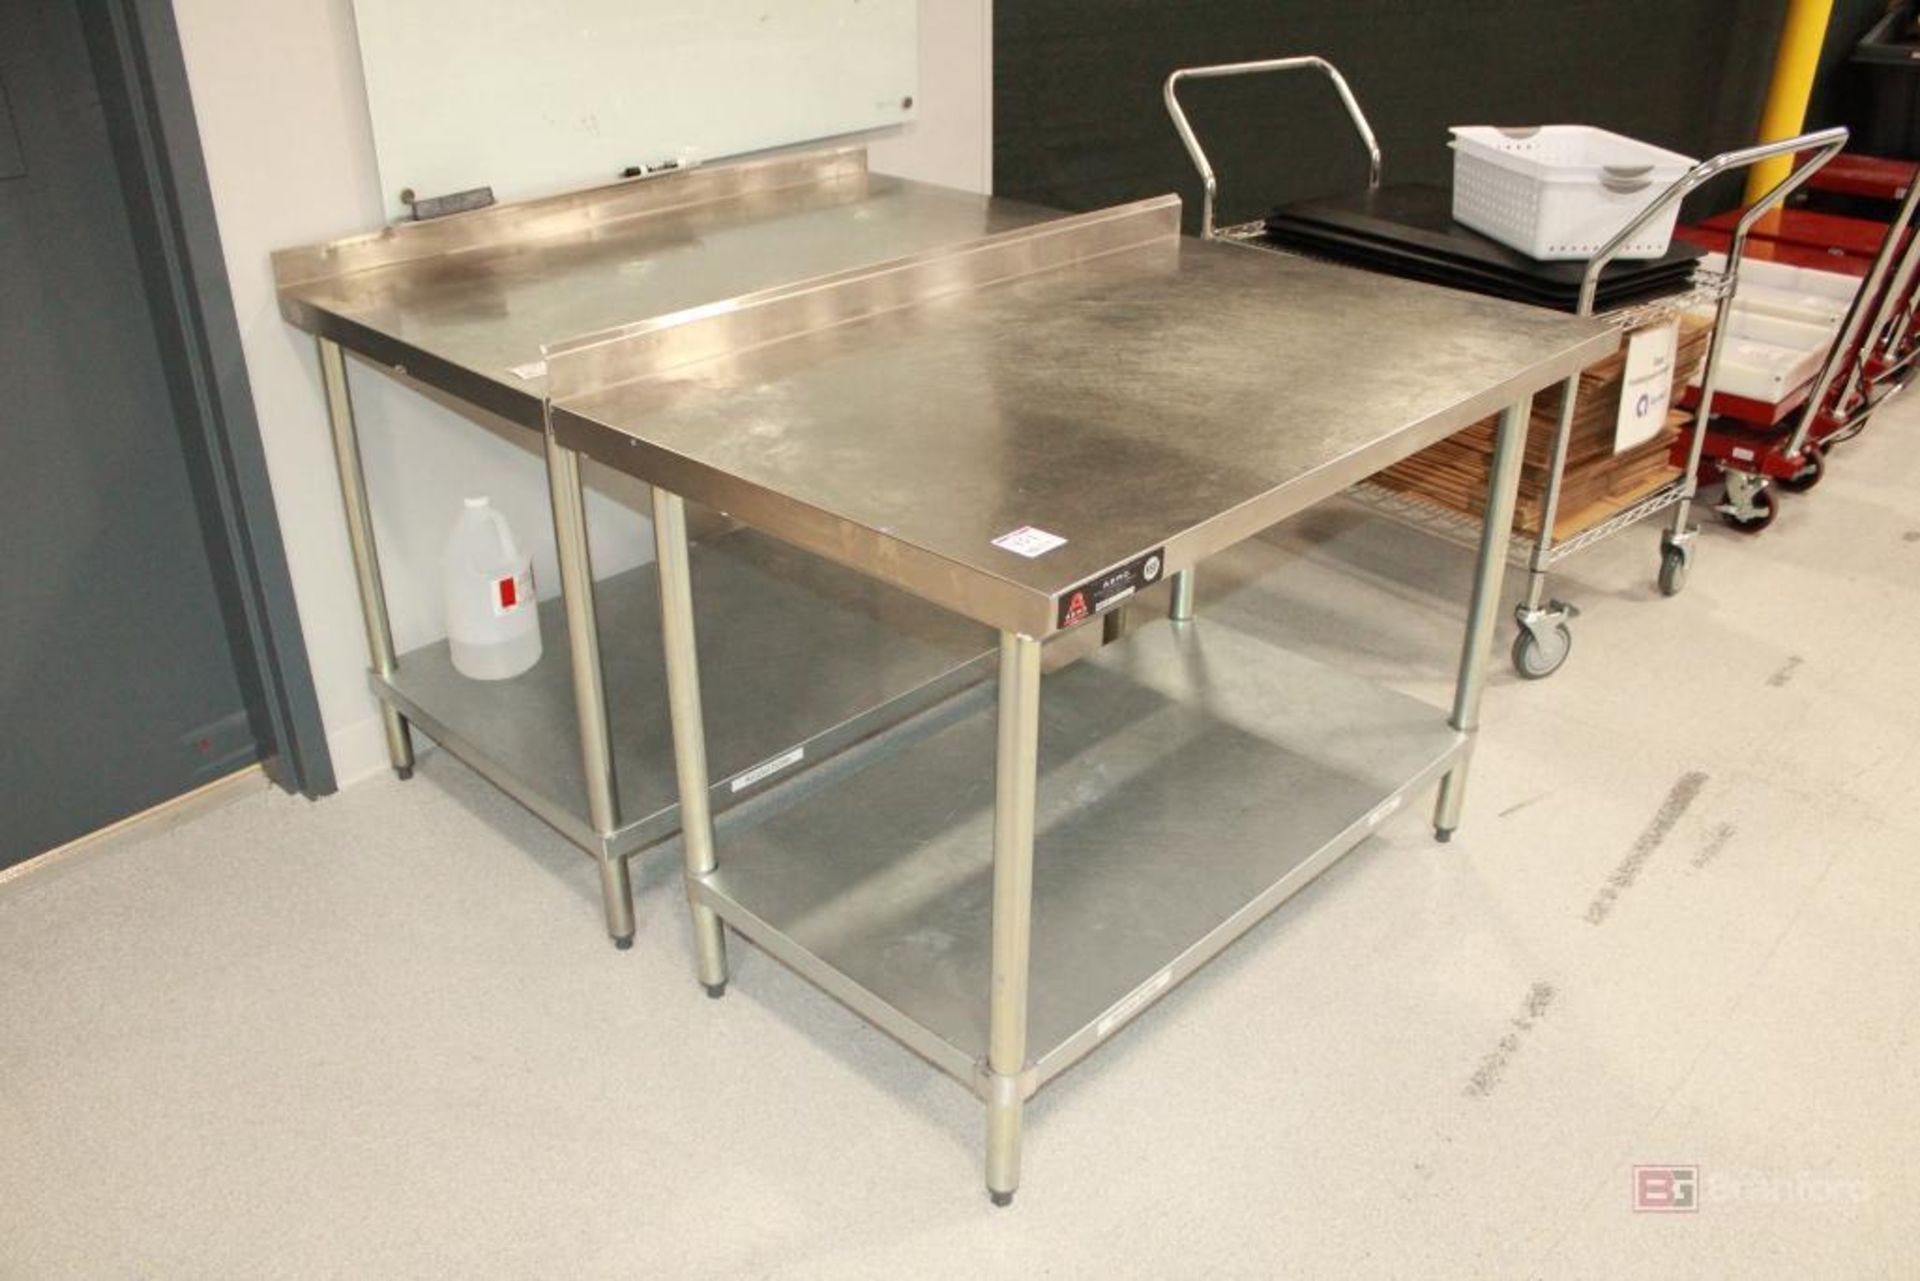 (2) AERO Brand Stainless Steel Tables